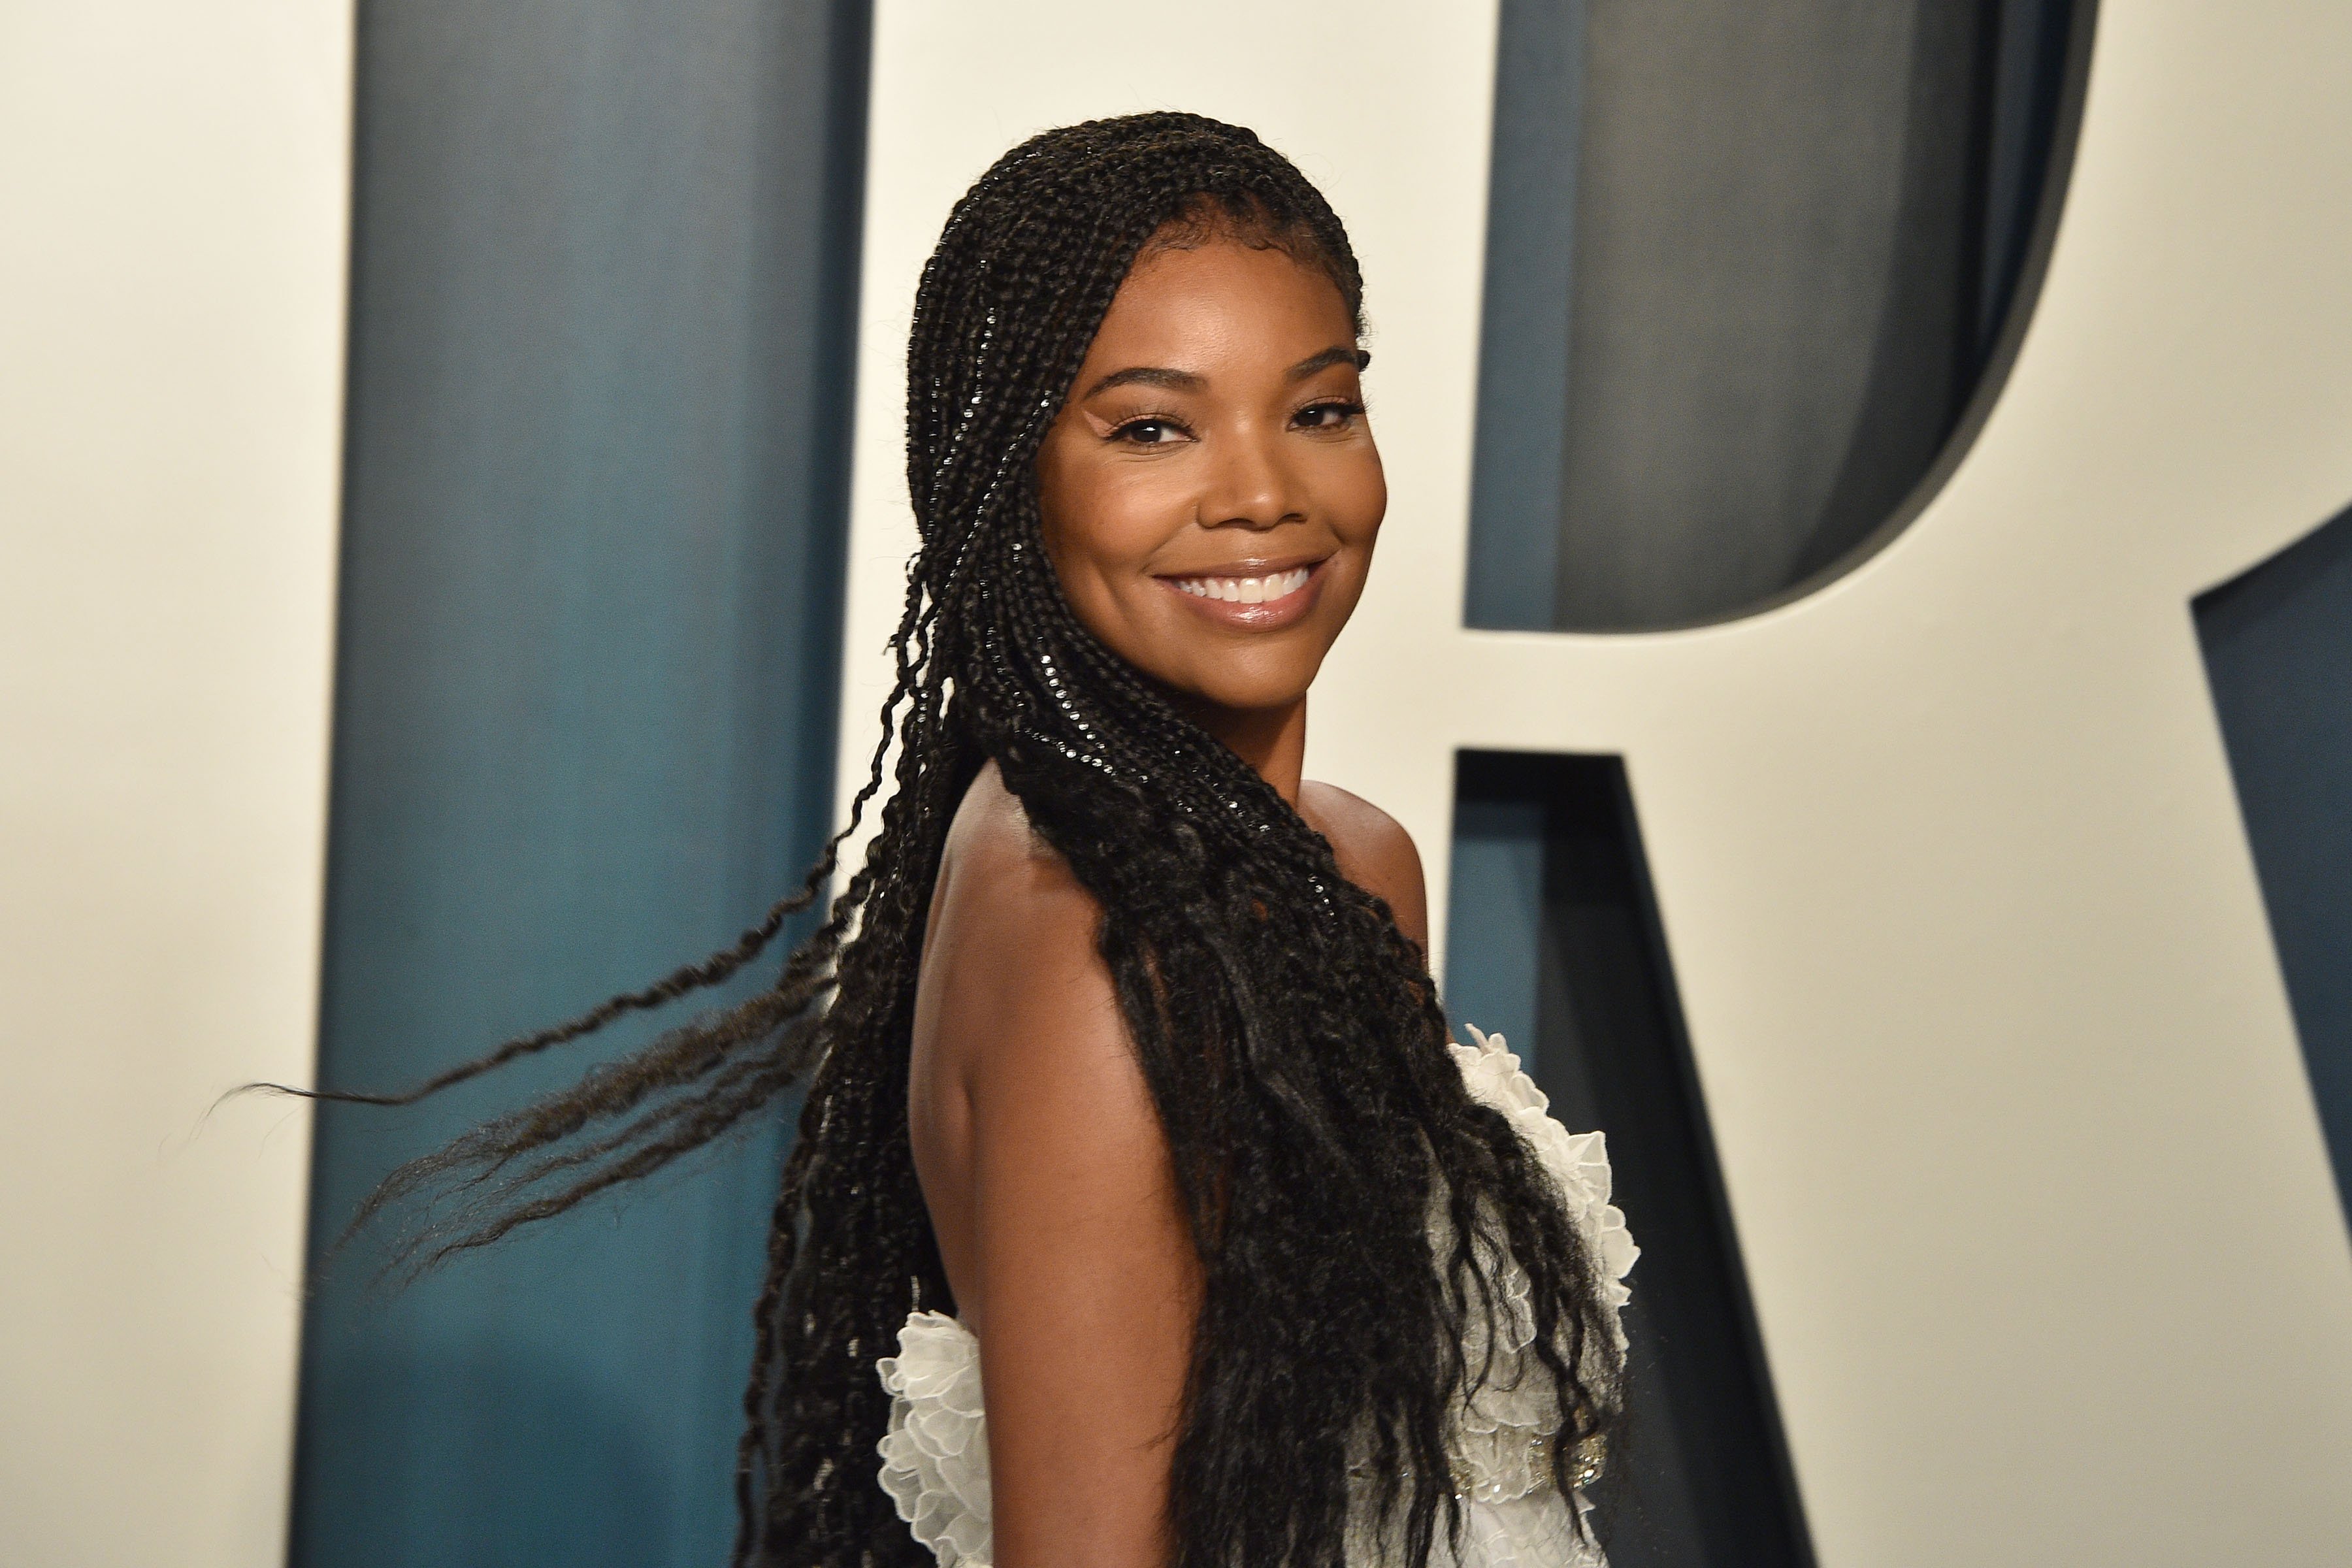 Gabrielle Union at the 2020 Vanity Fair Oscar Party at Wallis Annenberg Center for the Performing Arts on February 09, 2020 in Beverly Hills, California | Photo: Getty Images